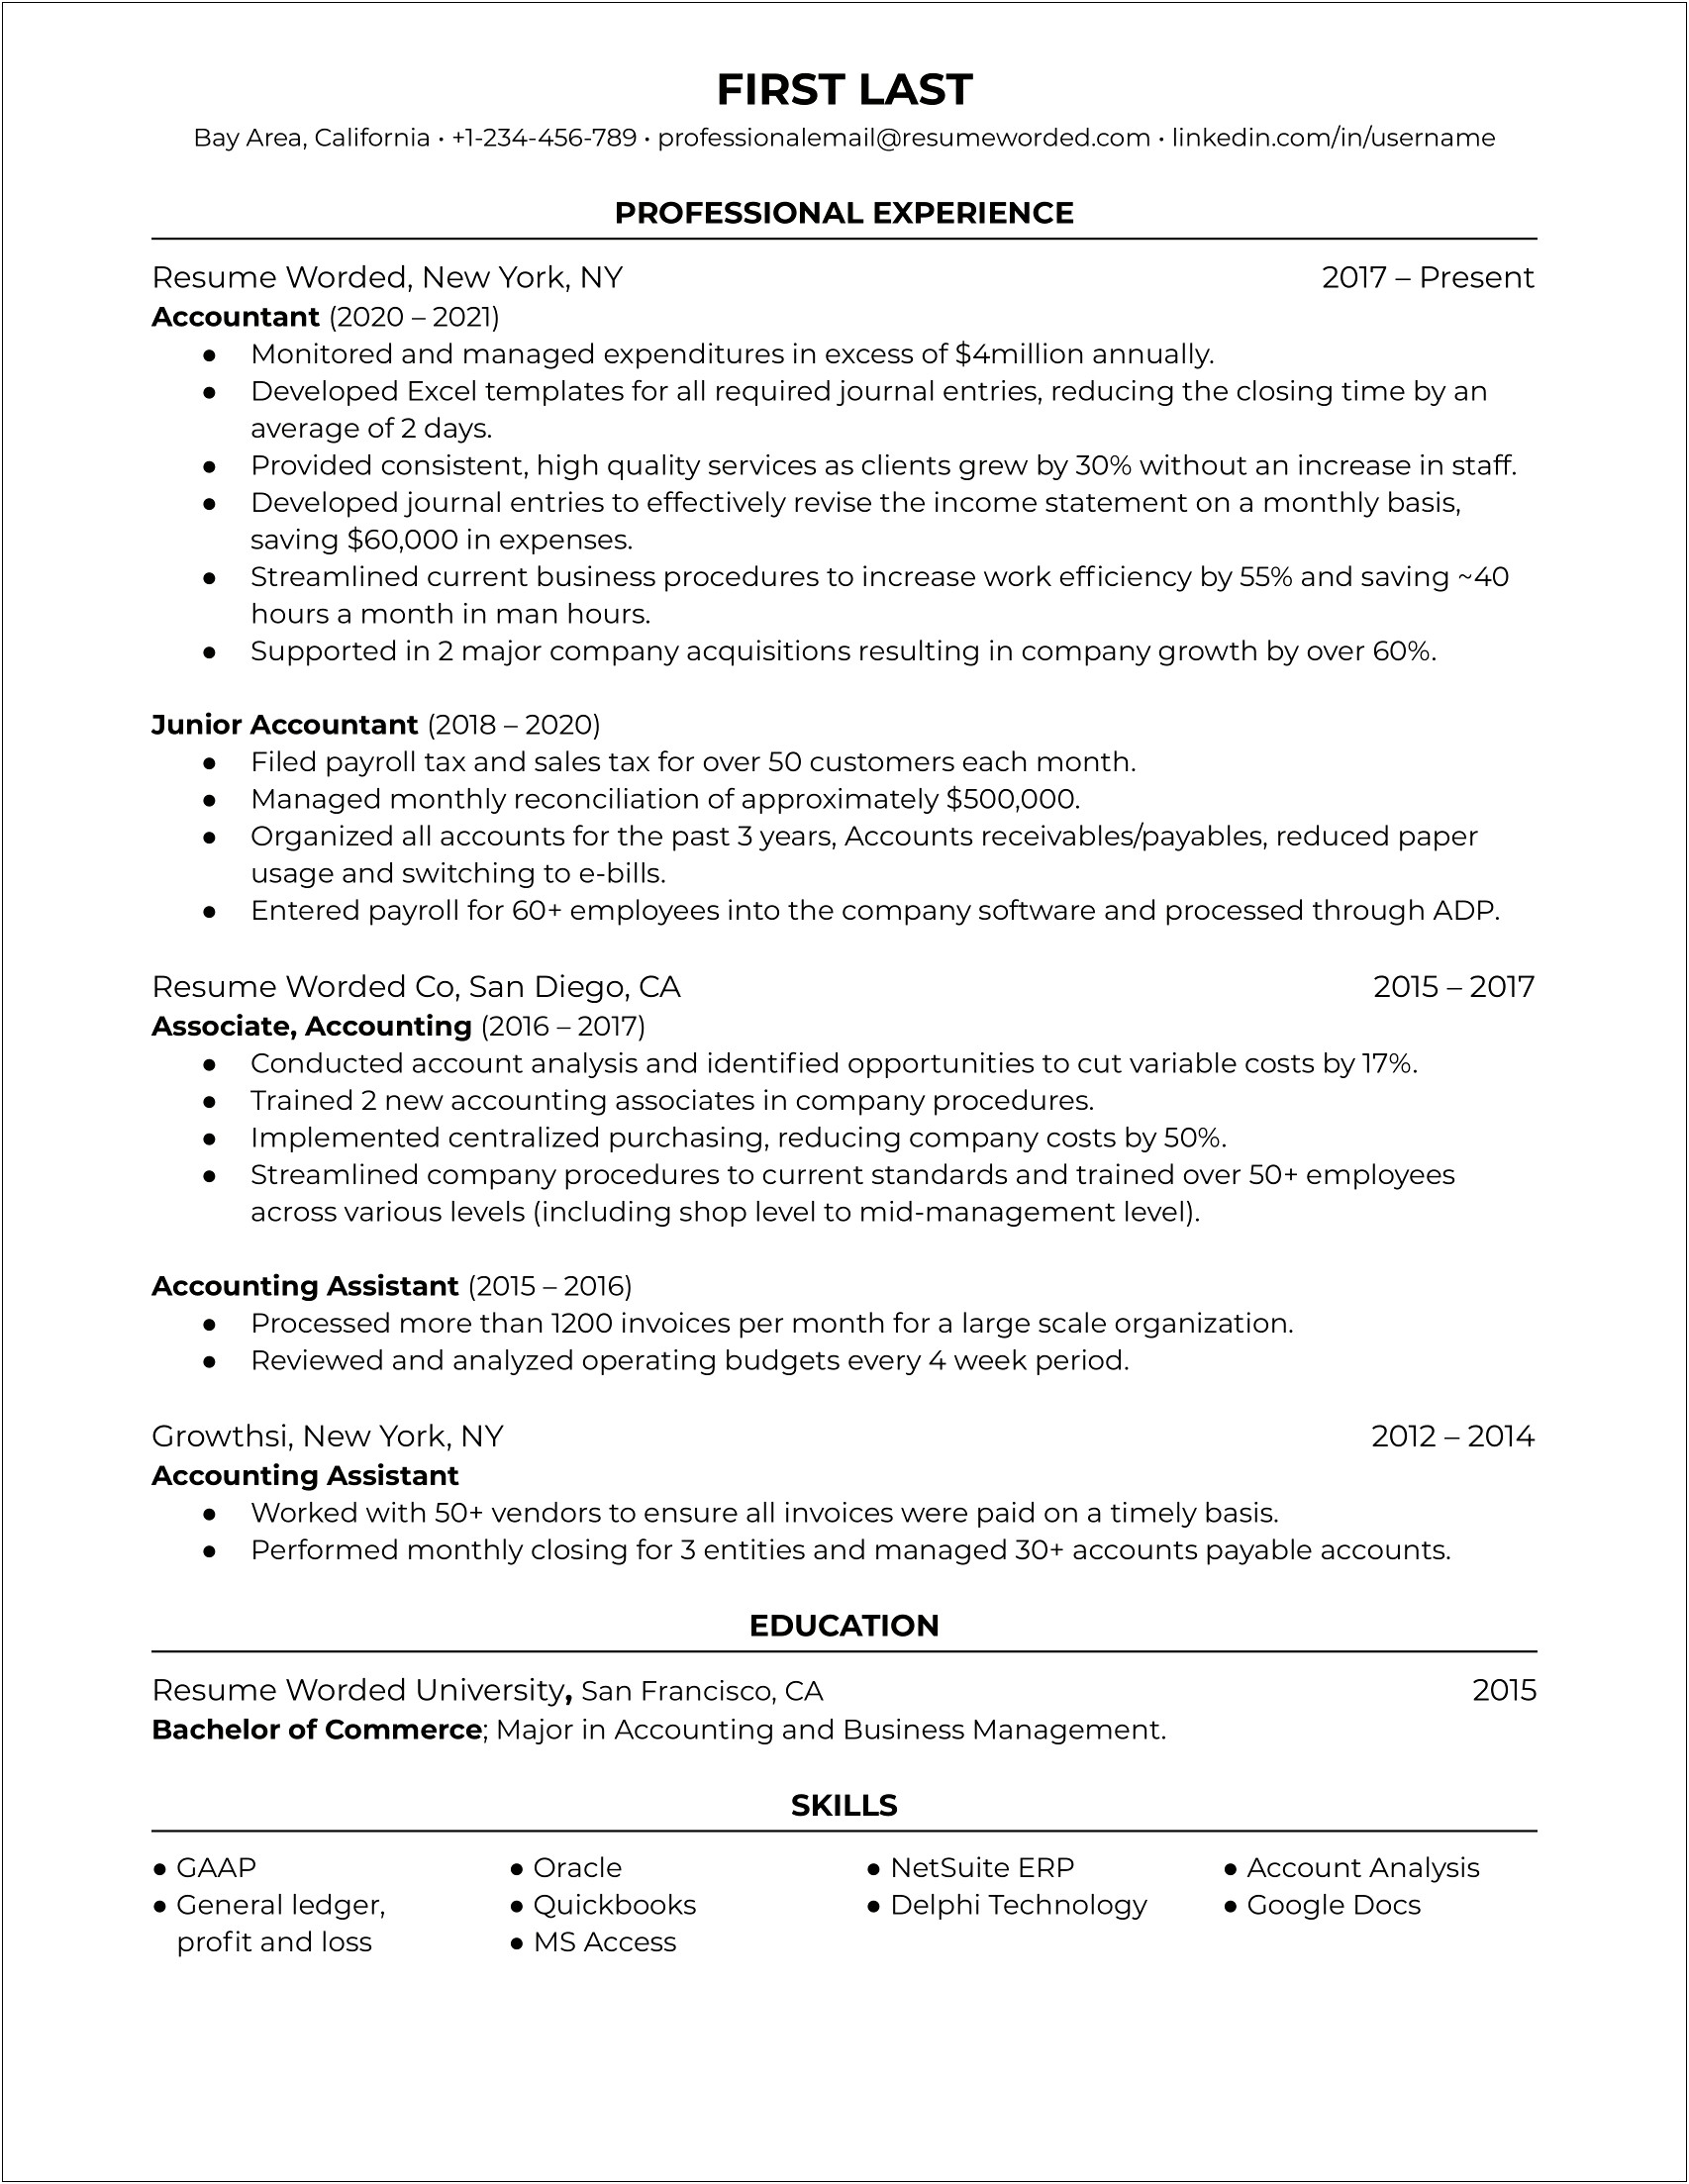 Junior Accountant Resume In Word Format For Fresher